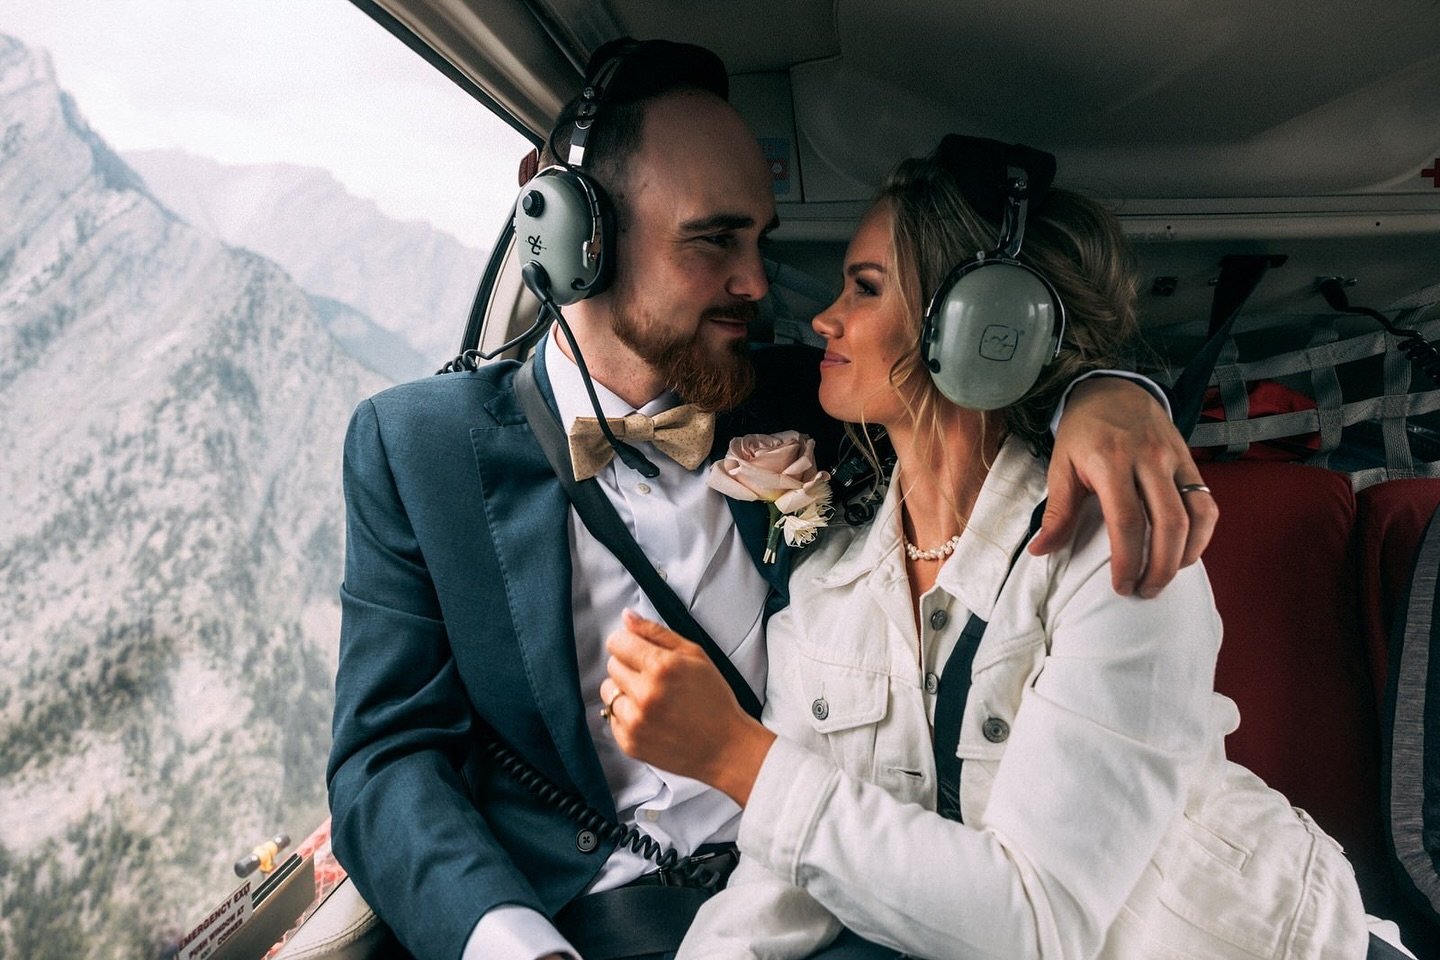 Why should you plan a helicopter elopement in Banff National Park? 

A helicopter tour for your elopement offers unparalleled views, private and secluded locations, and an unforgettable adventure. Imagine exchanging vows surrounded by majestic mounta